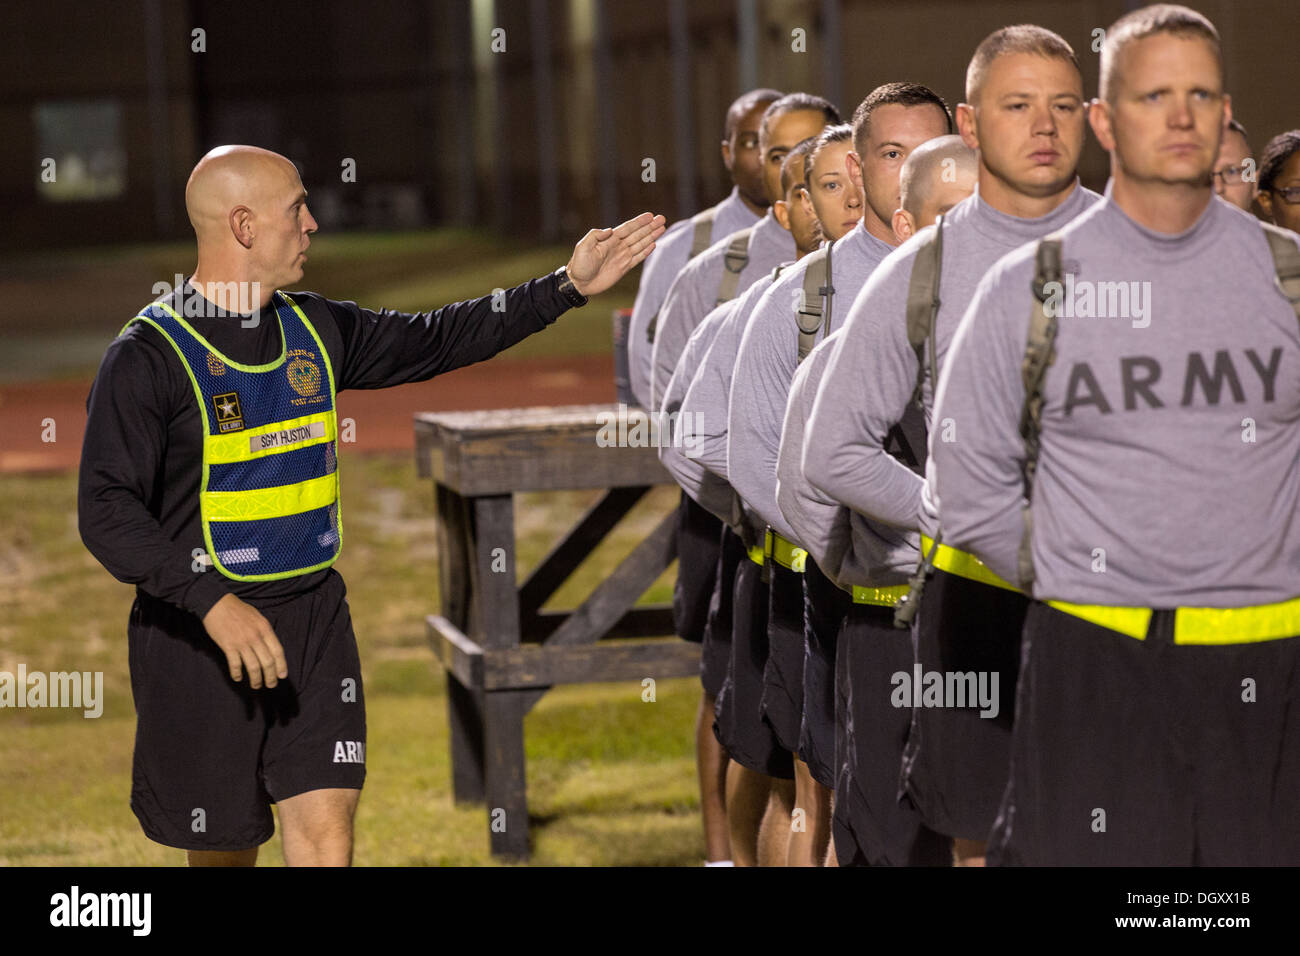 Sergeant Major Blaine J. Huston yells instructions to Drill Sergeant candidates at the US Army Drill Instructors School Fort Jackson line up before taking their physical training test early morning September 27, 2013 in Columbia, SC. While 14 percent of the Army is women soldiers there is a shortage of female Drill Sergeants. Stock Photo